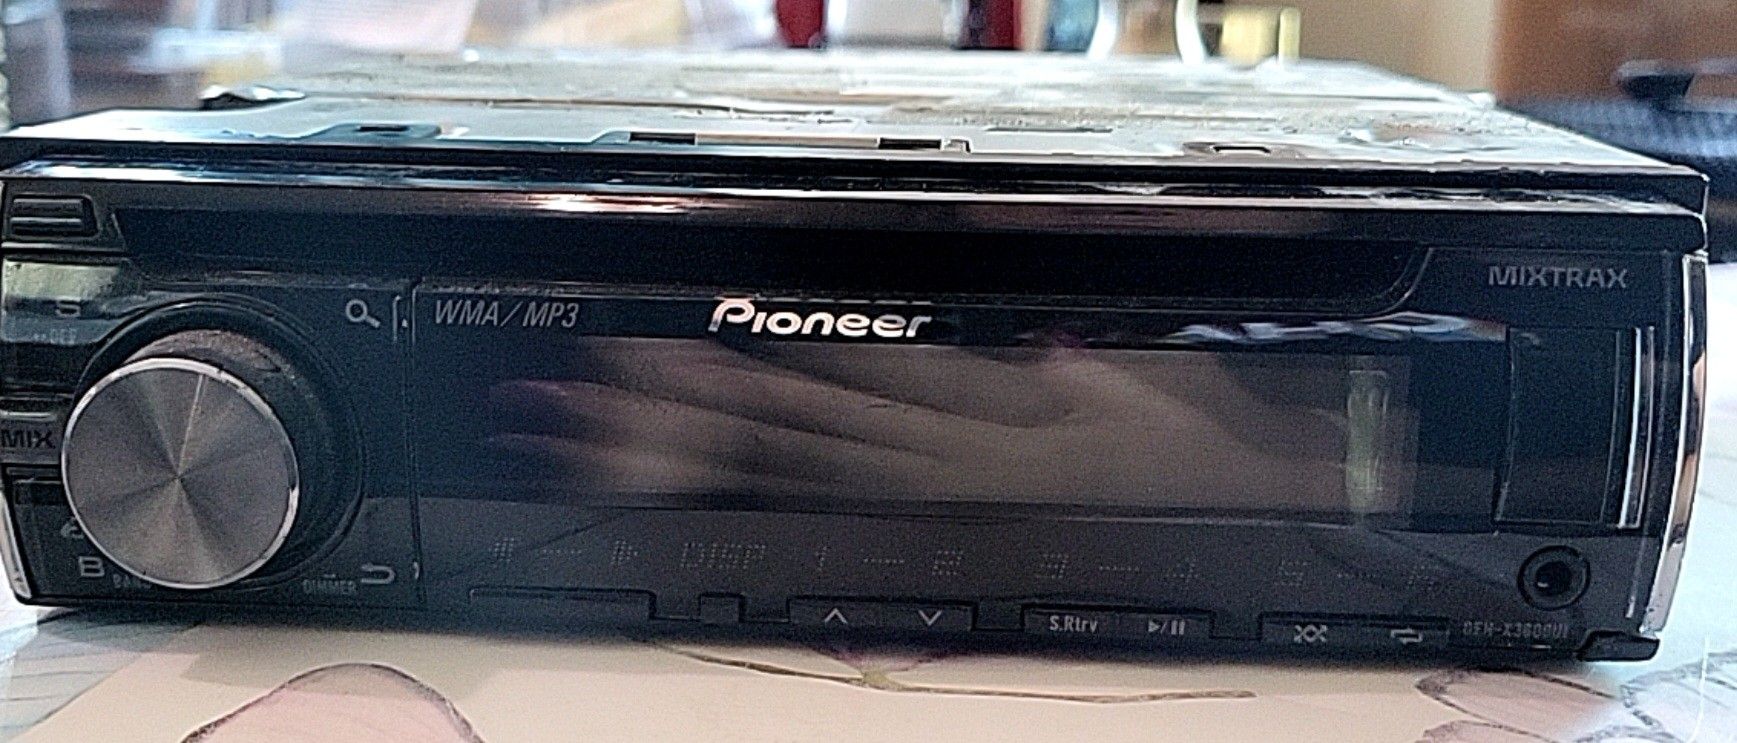 PIONEER  DEH X3600UI WMA/MP3,  MIXTRAX. CD, CAR STEREO RECEIVER.  EXCELLENT CONDITION 